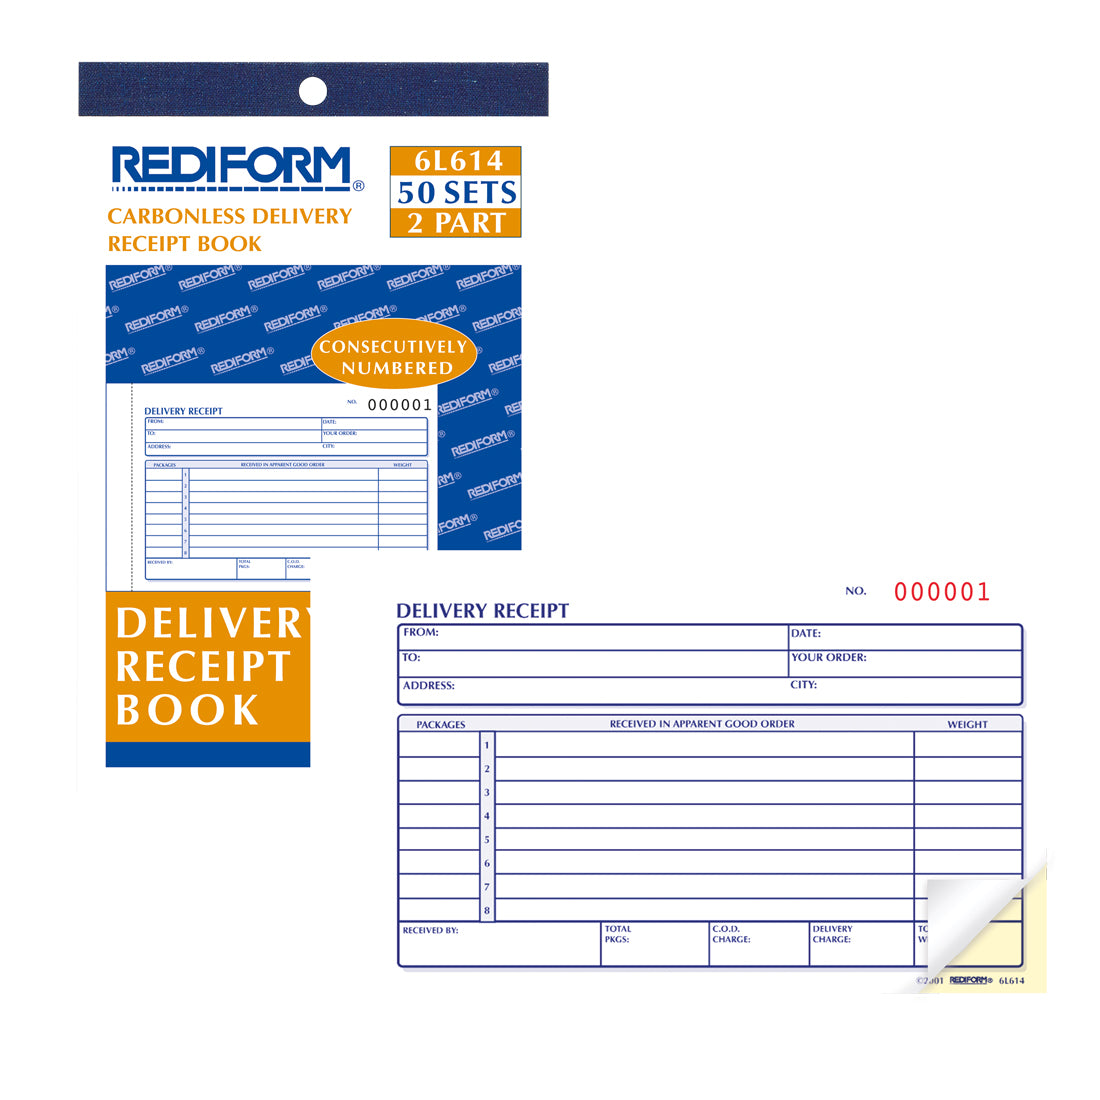 Delivery Receipt Book 6L614